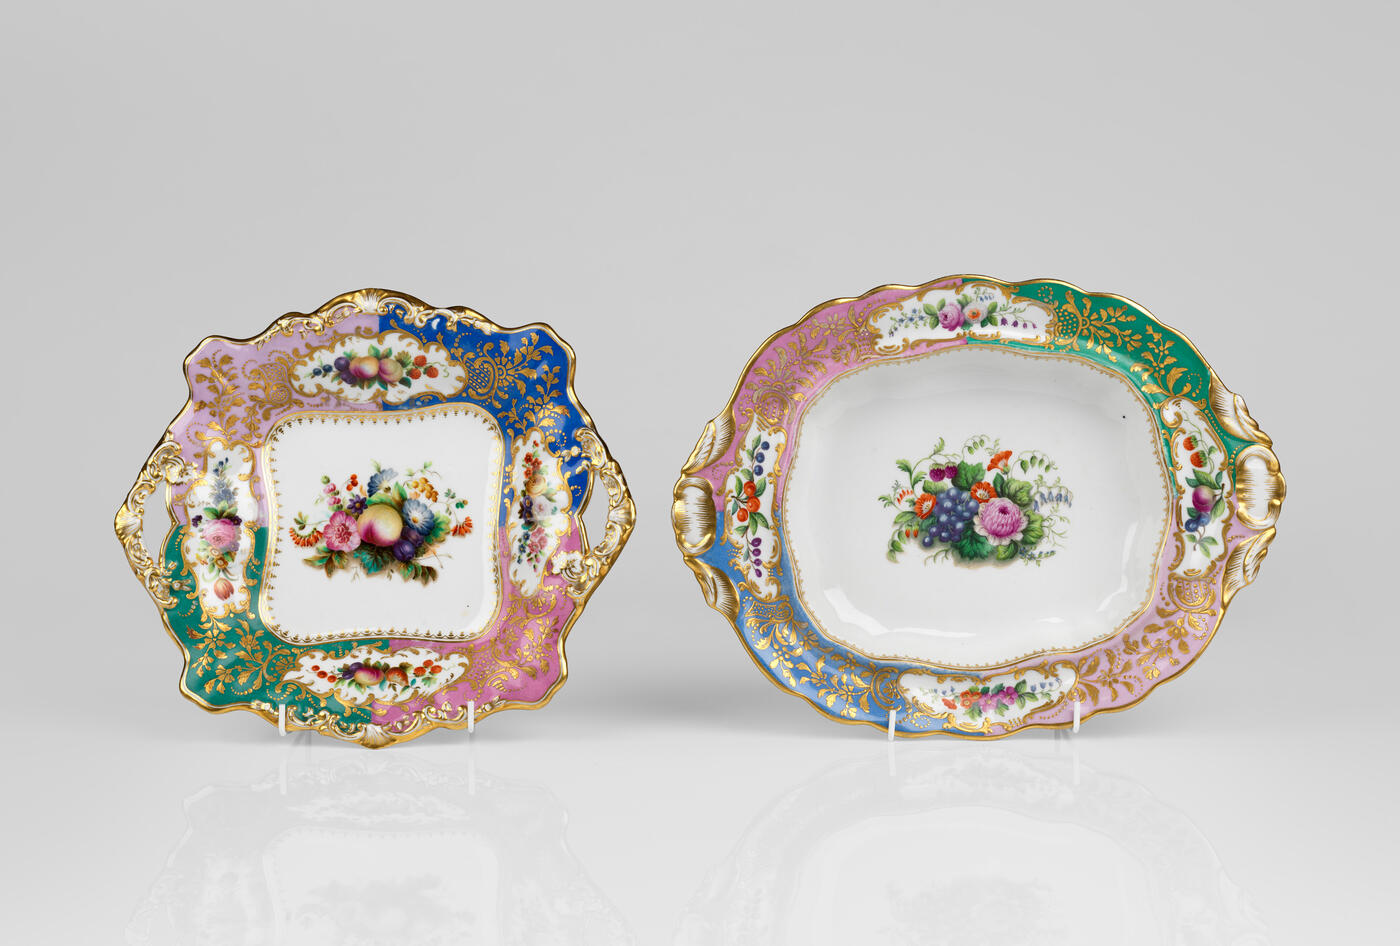 A Pair of Fruit Bowls from the Grand Duke Mikhail Pavlovich Service